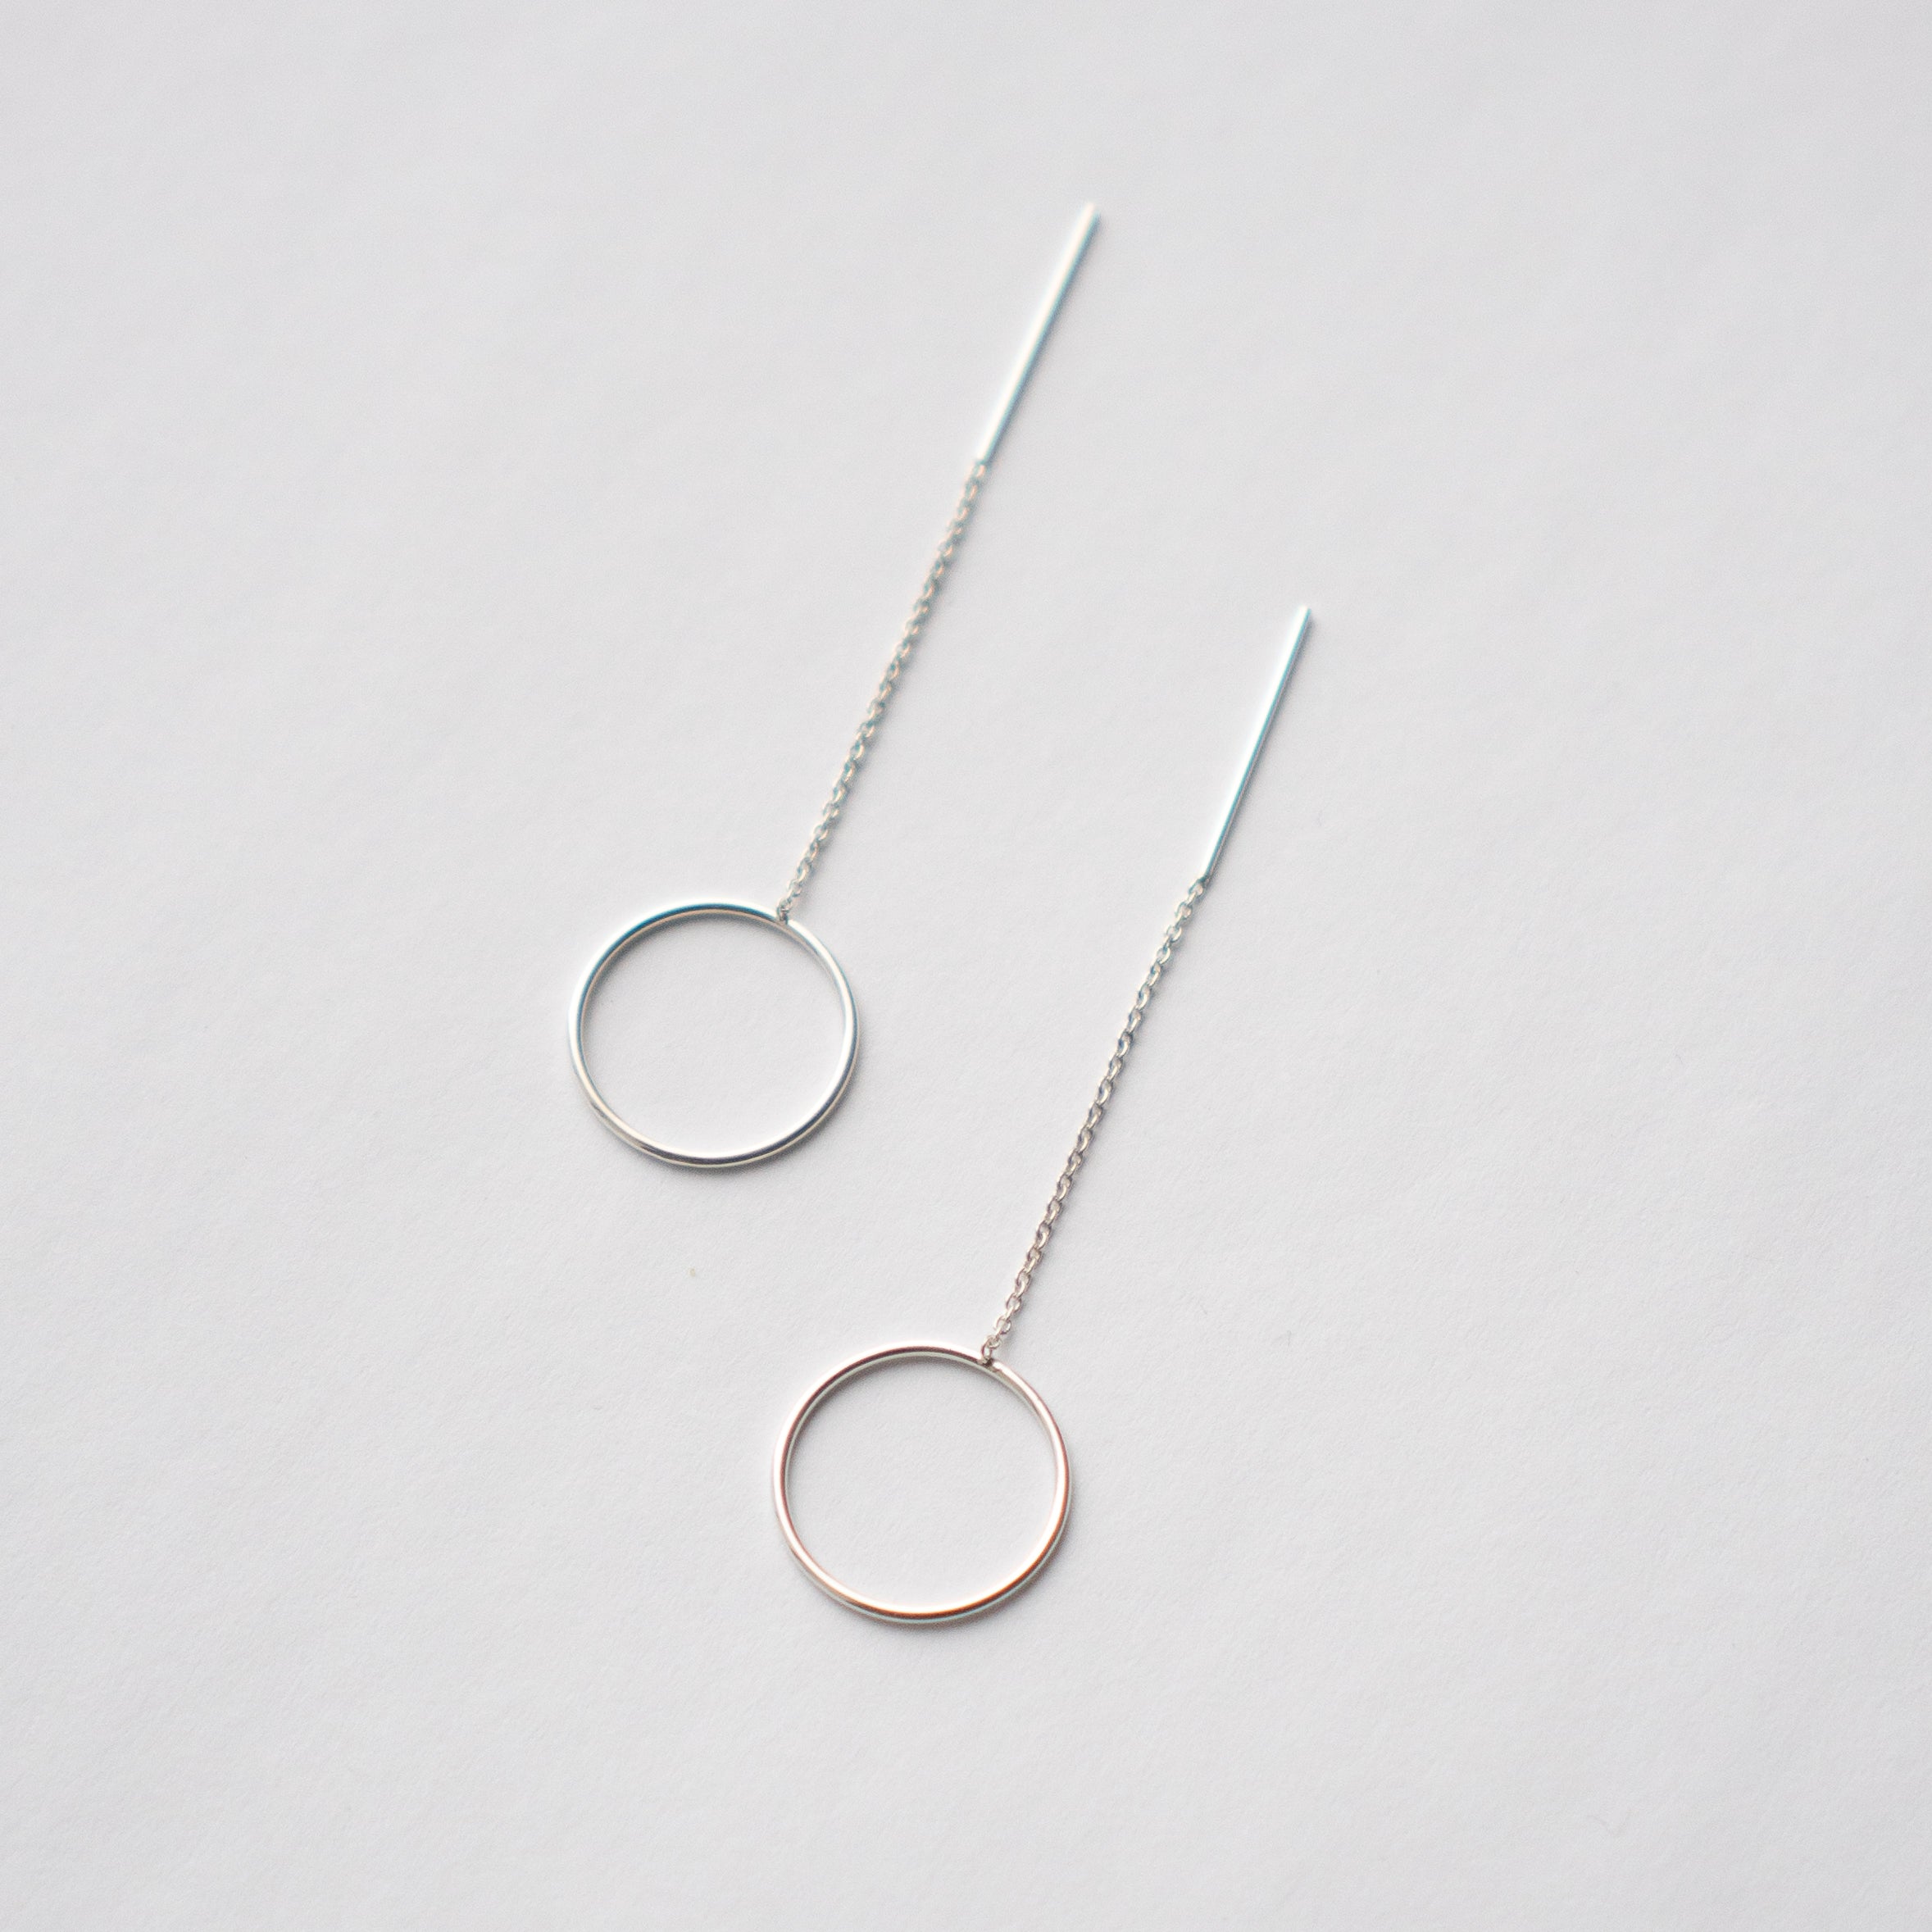 Handmade Lili Pull-Through Circle earrings in 14k yellow gold by SHW Fine Jewelry in NYC